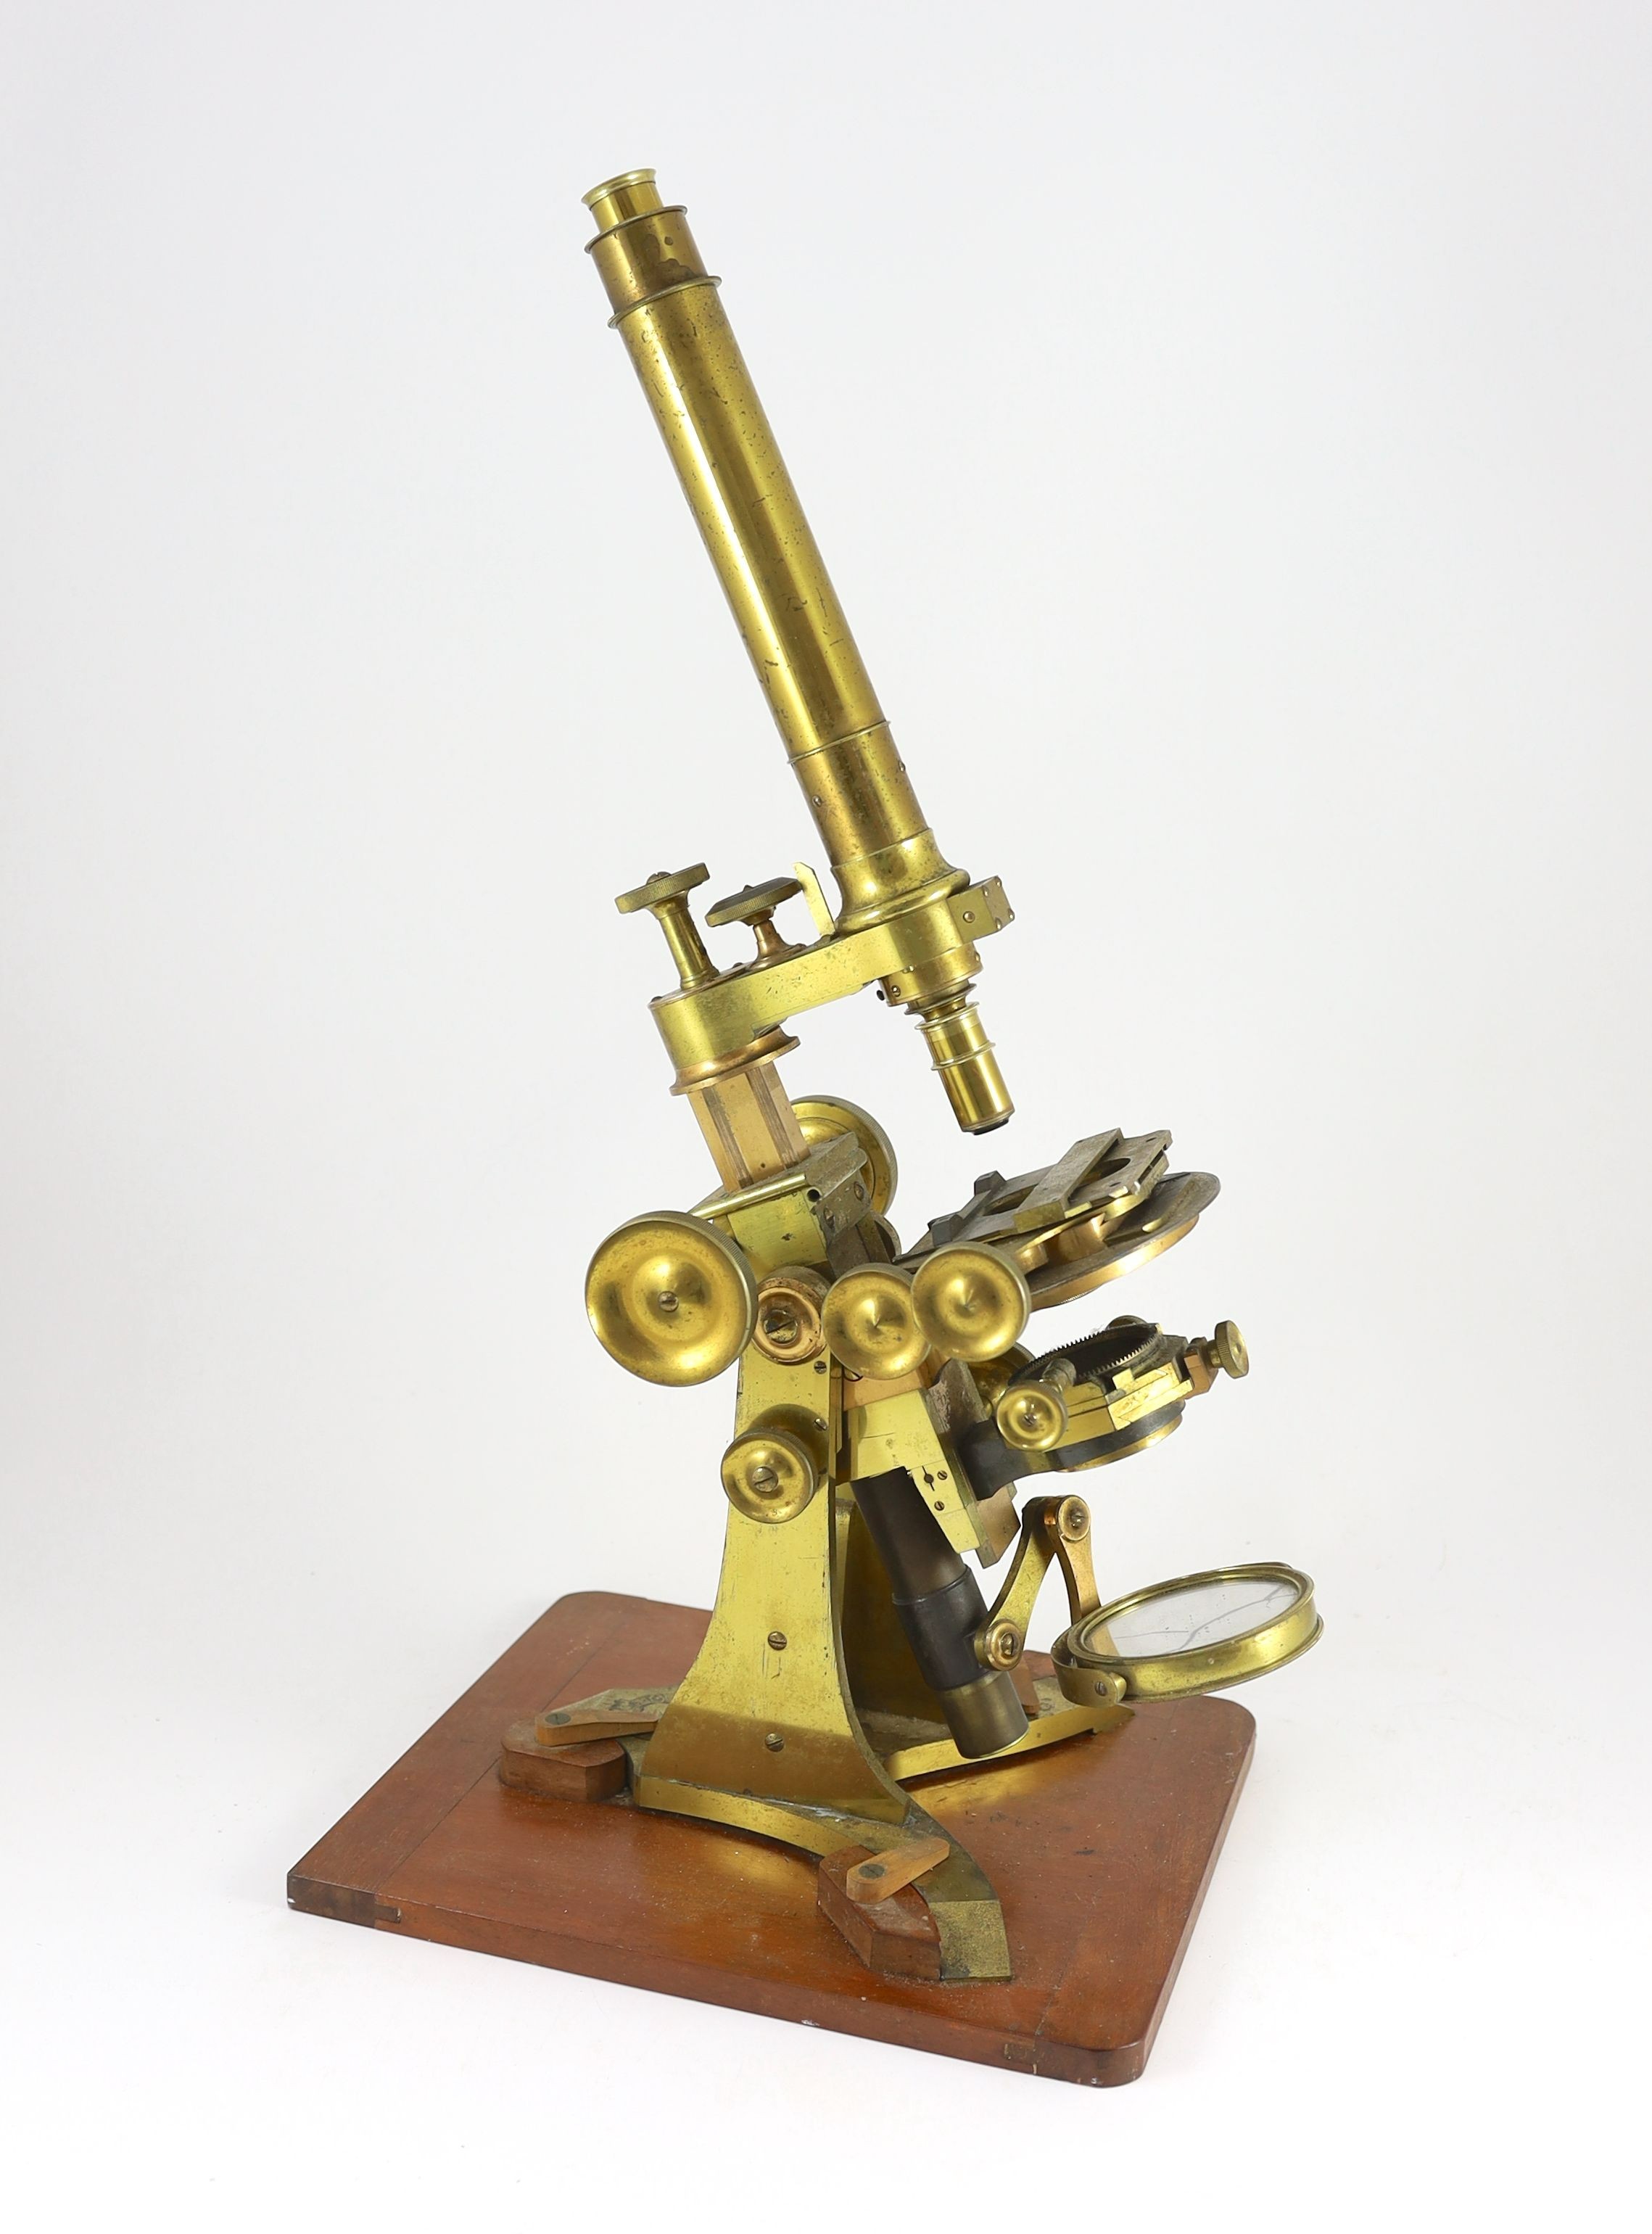 A good Victorian lacquered brass monocular microscope, originally owned by civil engineer Charles Neate (1821-1911), microscope height 59cm